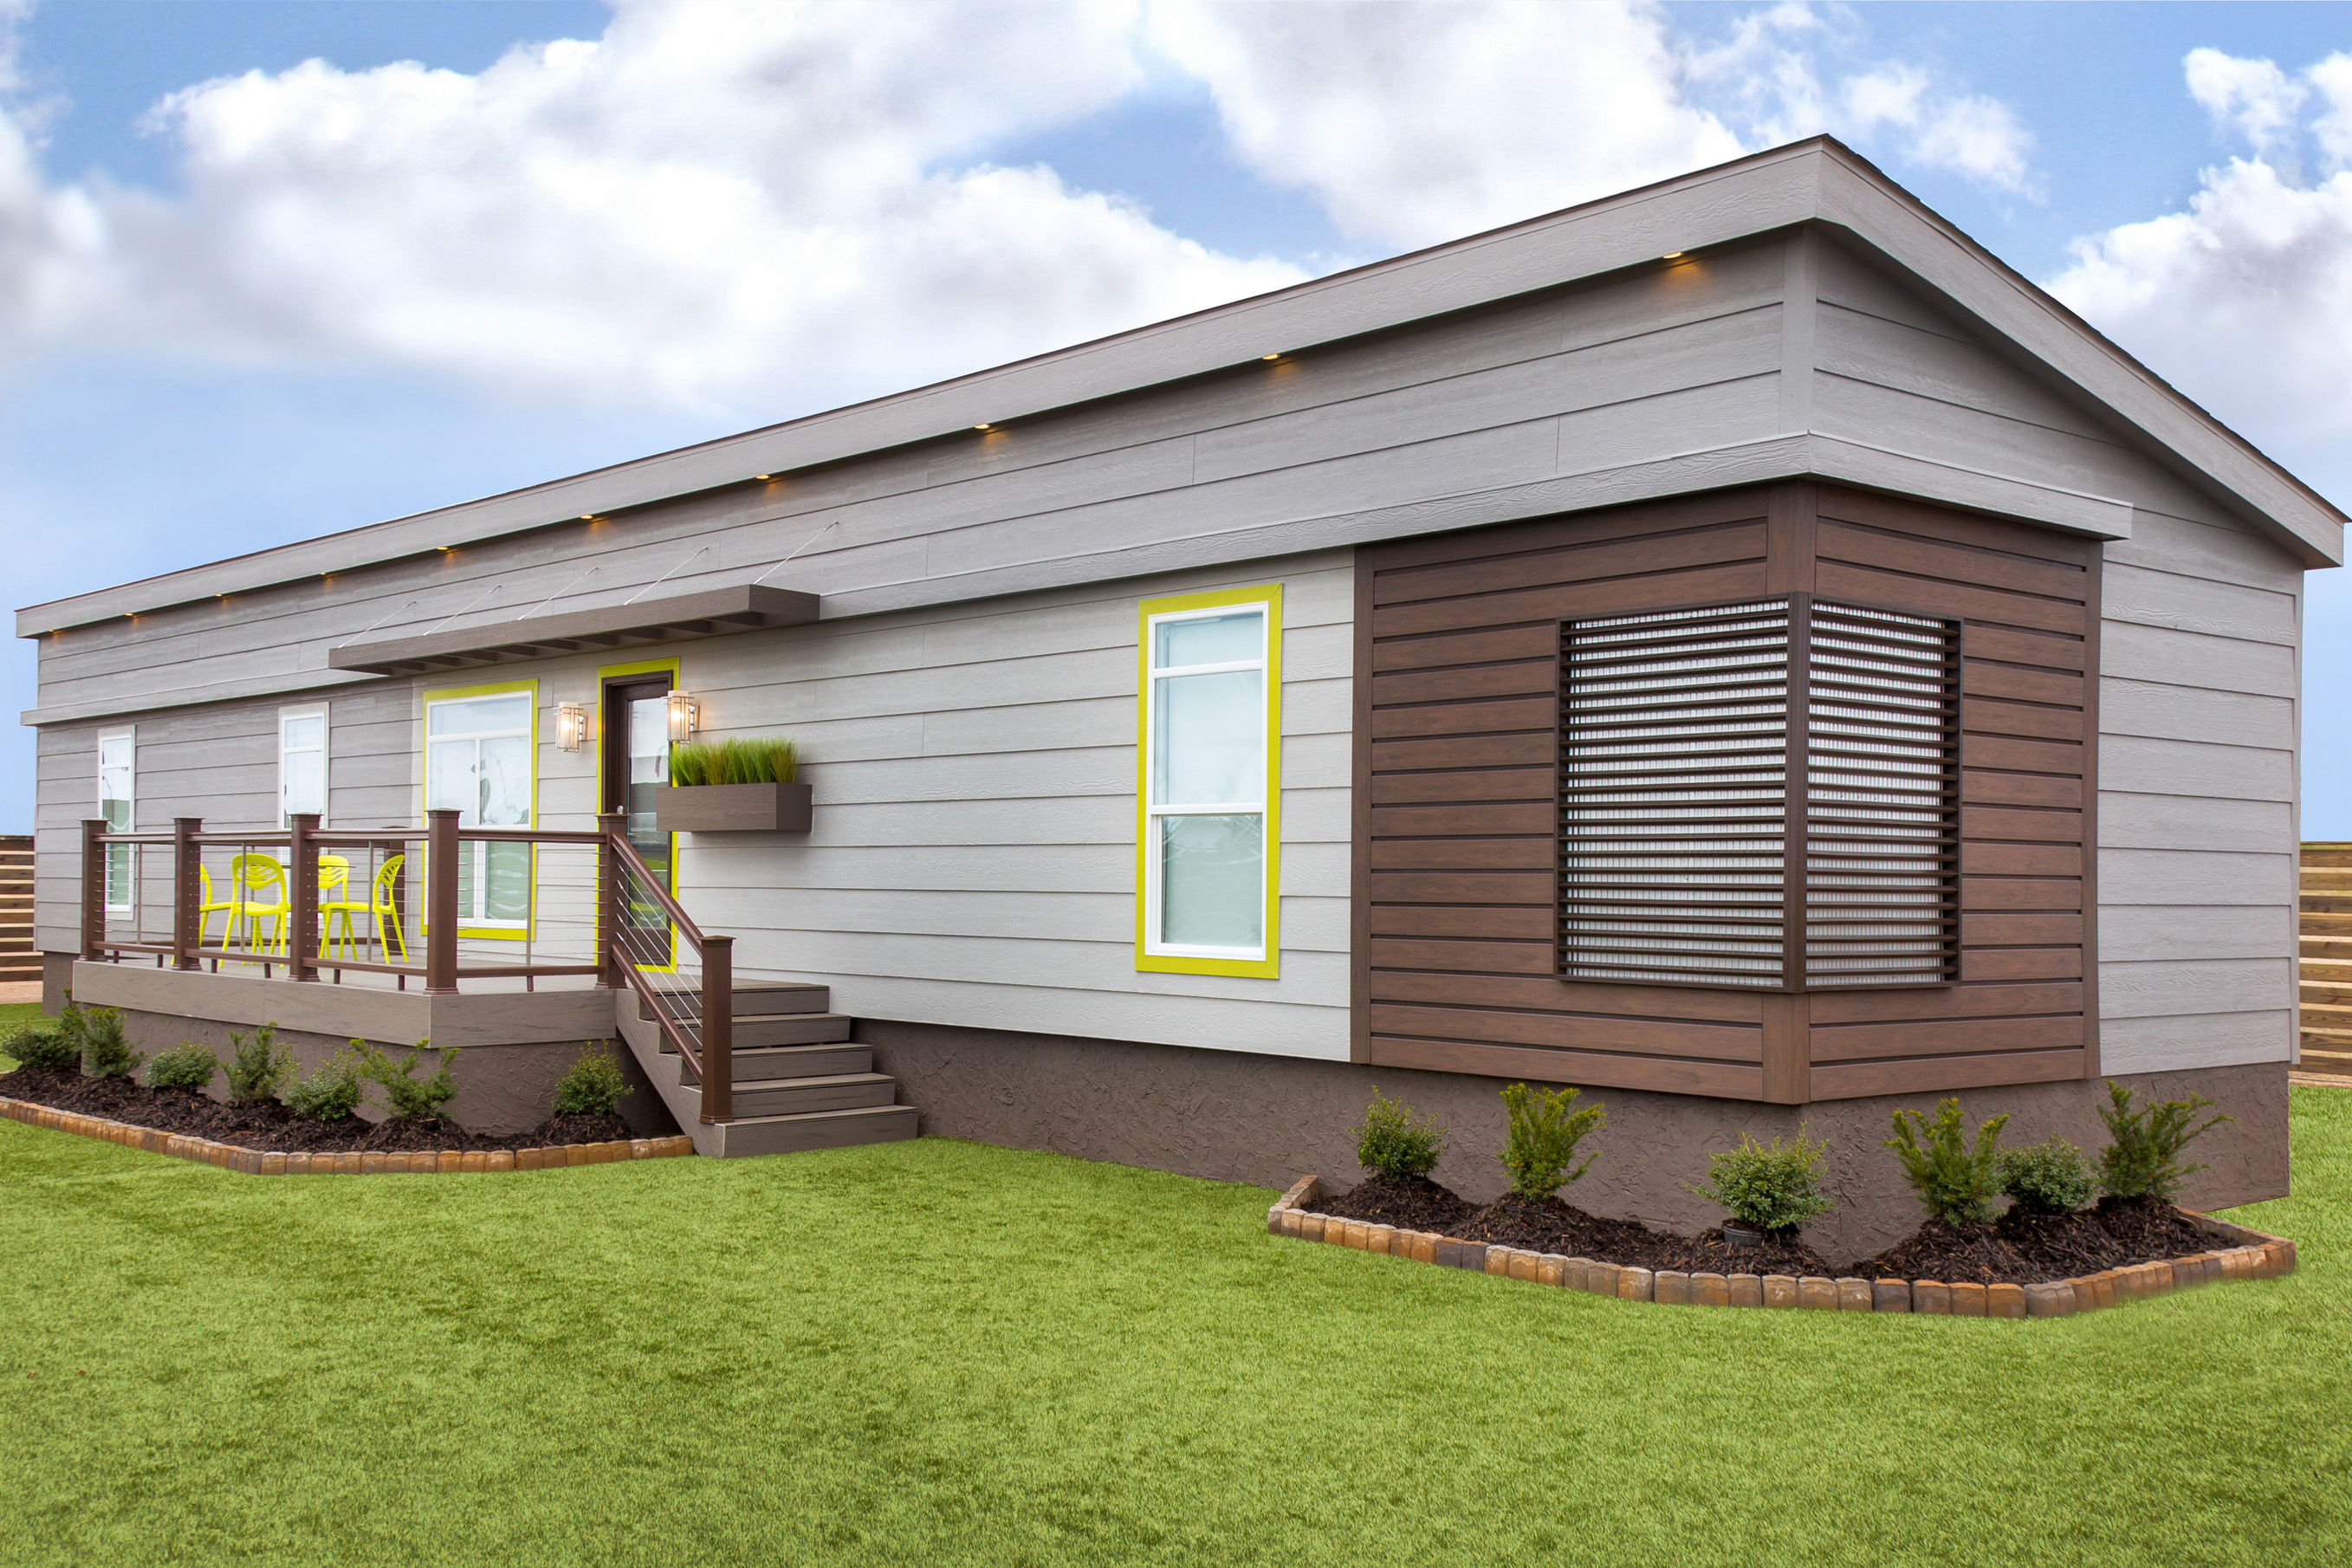 Clayton Homes Rolls Out Floor Plans for Fans of Tiny House